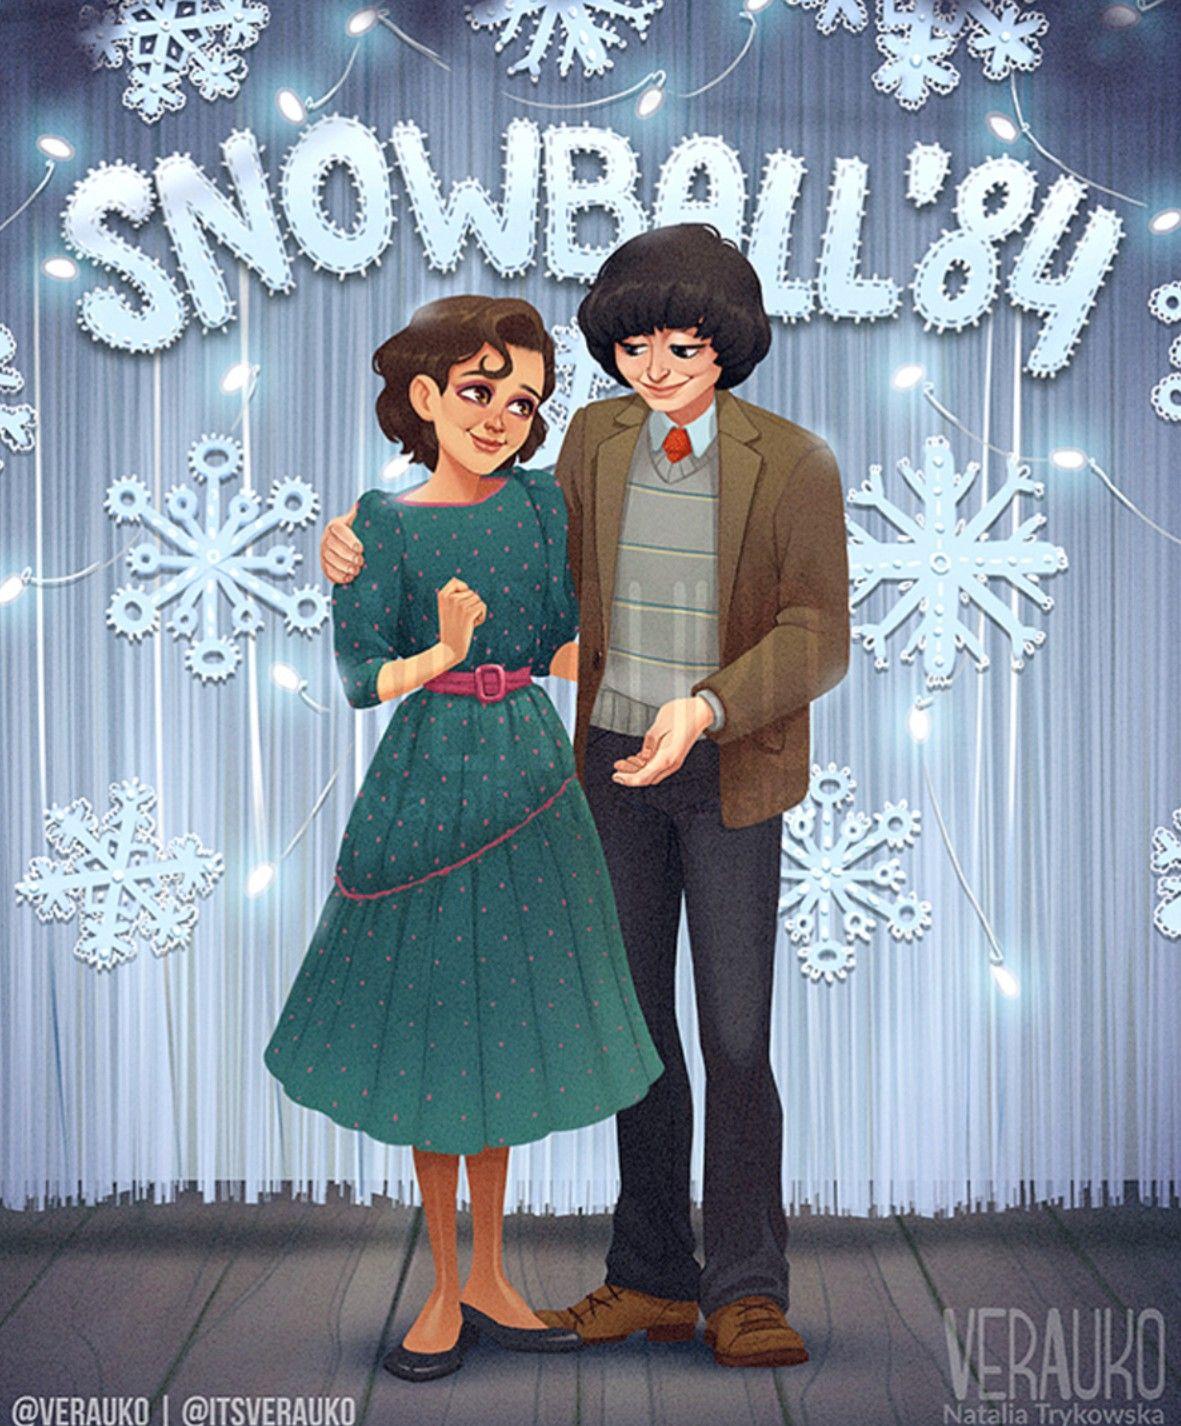 Stranger Things Mike and Eleven, Mileven at the Snowball